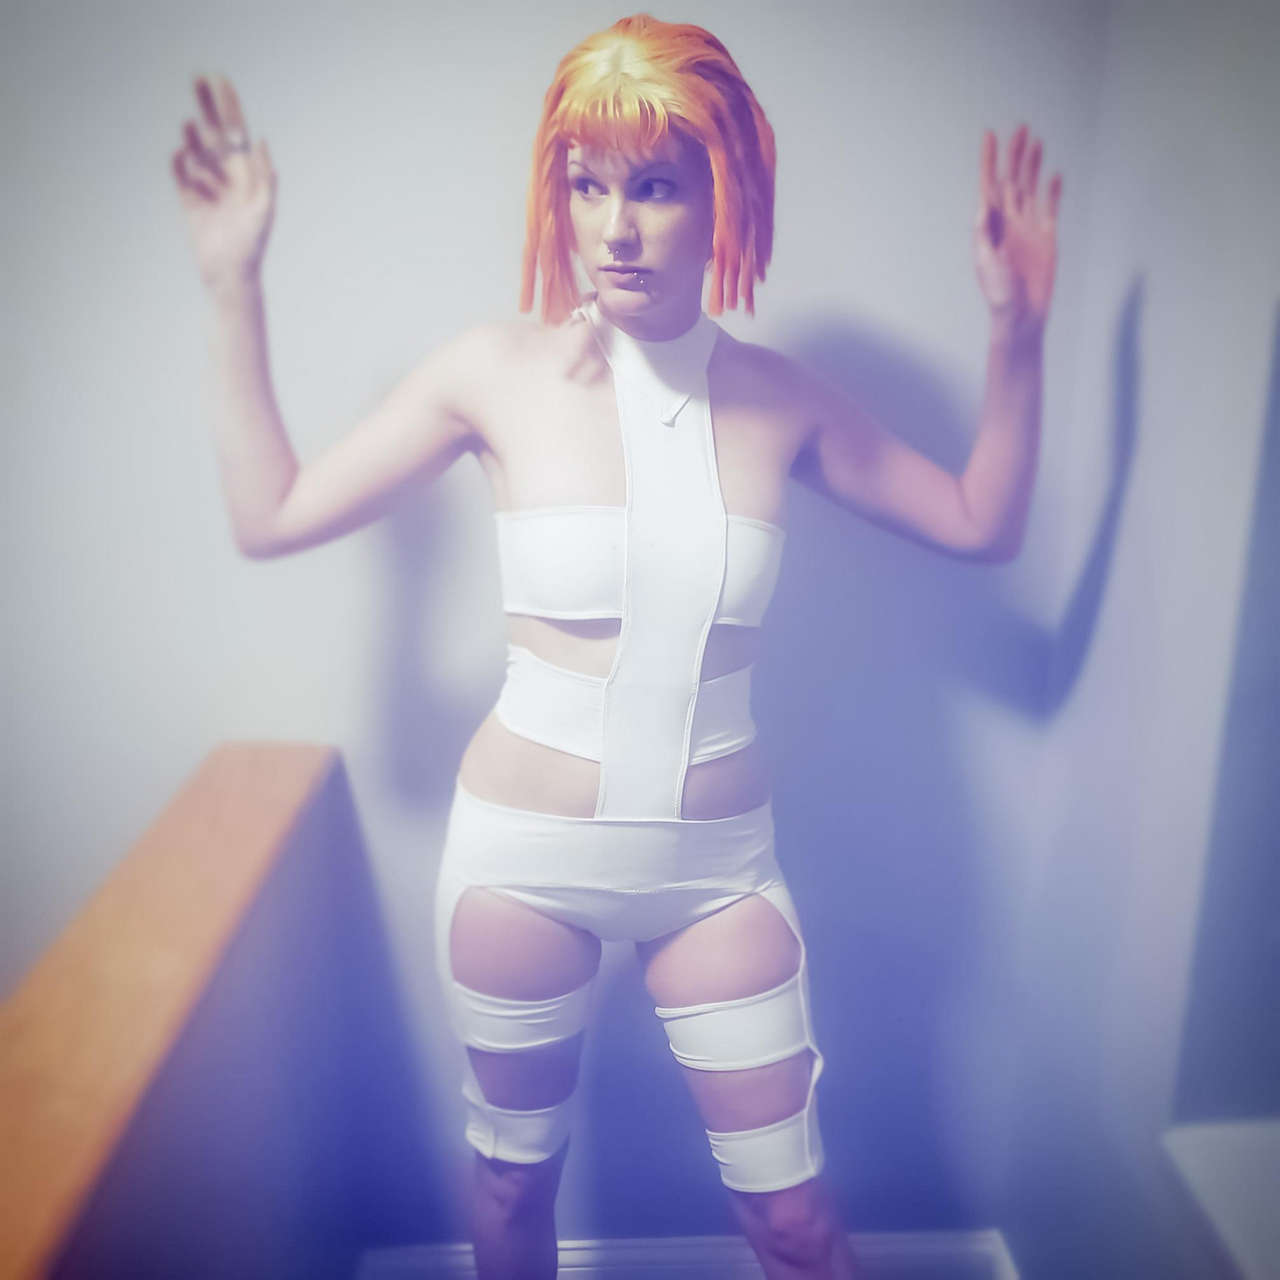 Leeloo Dallas From Fifth Element By Dingusdanghec